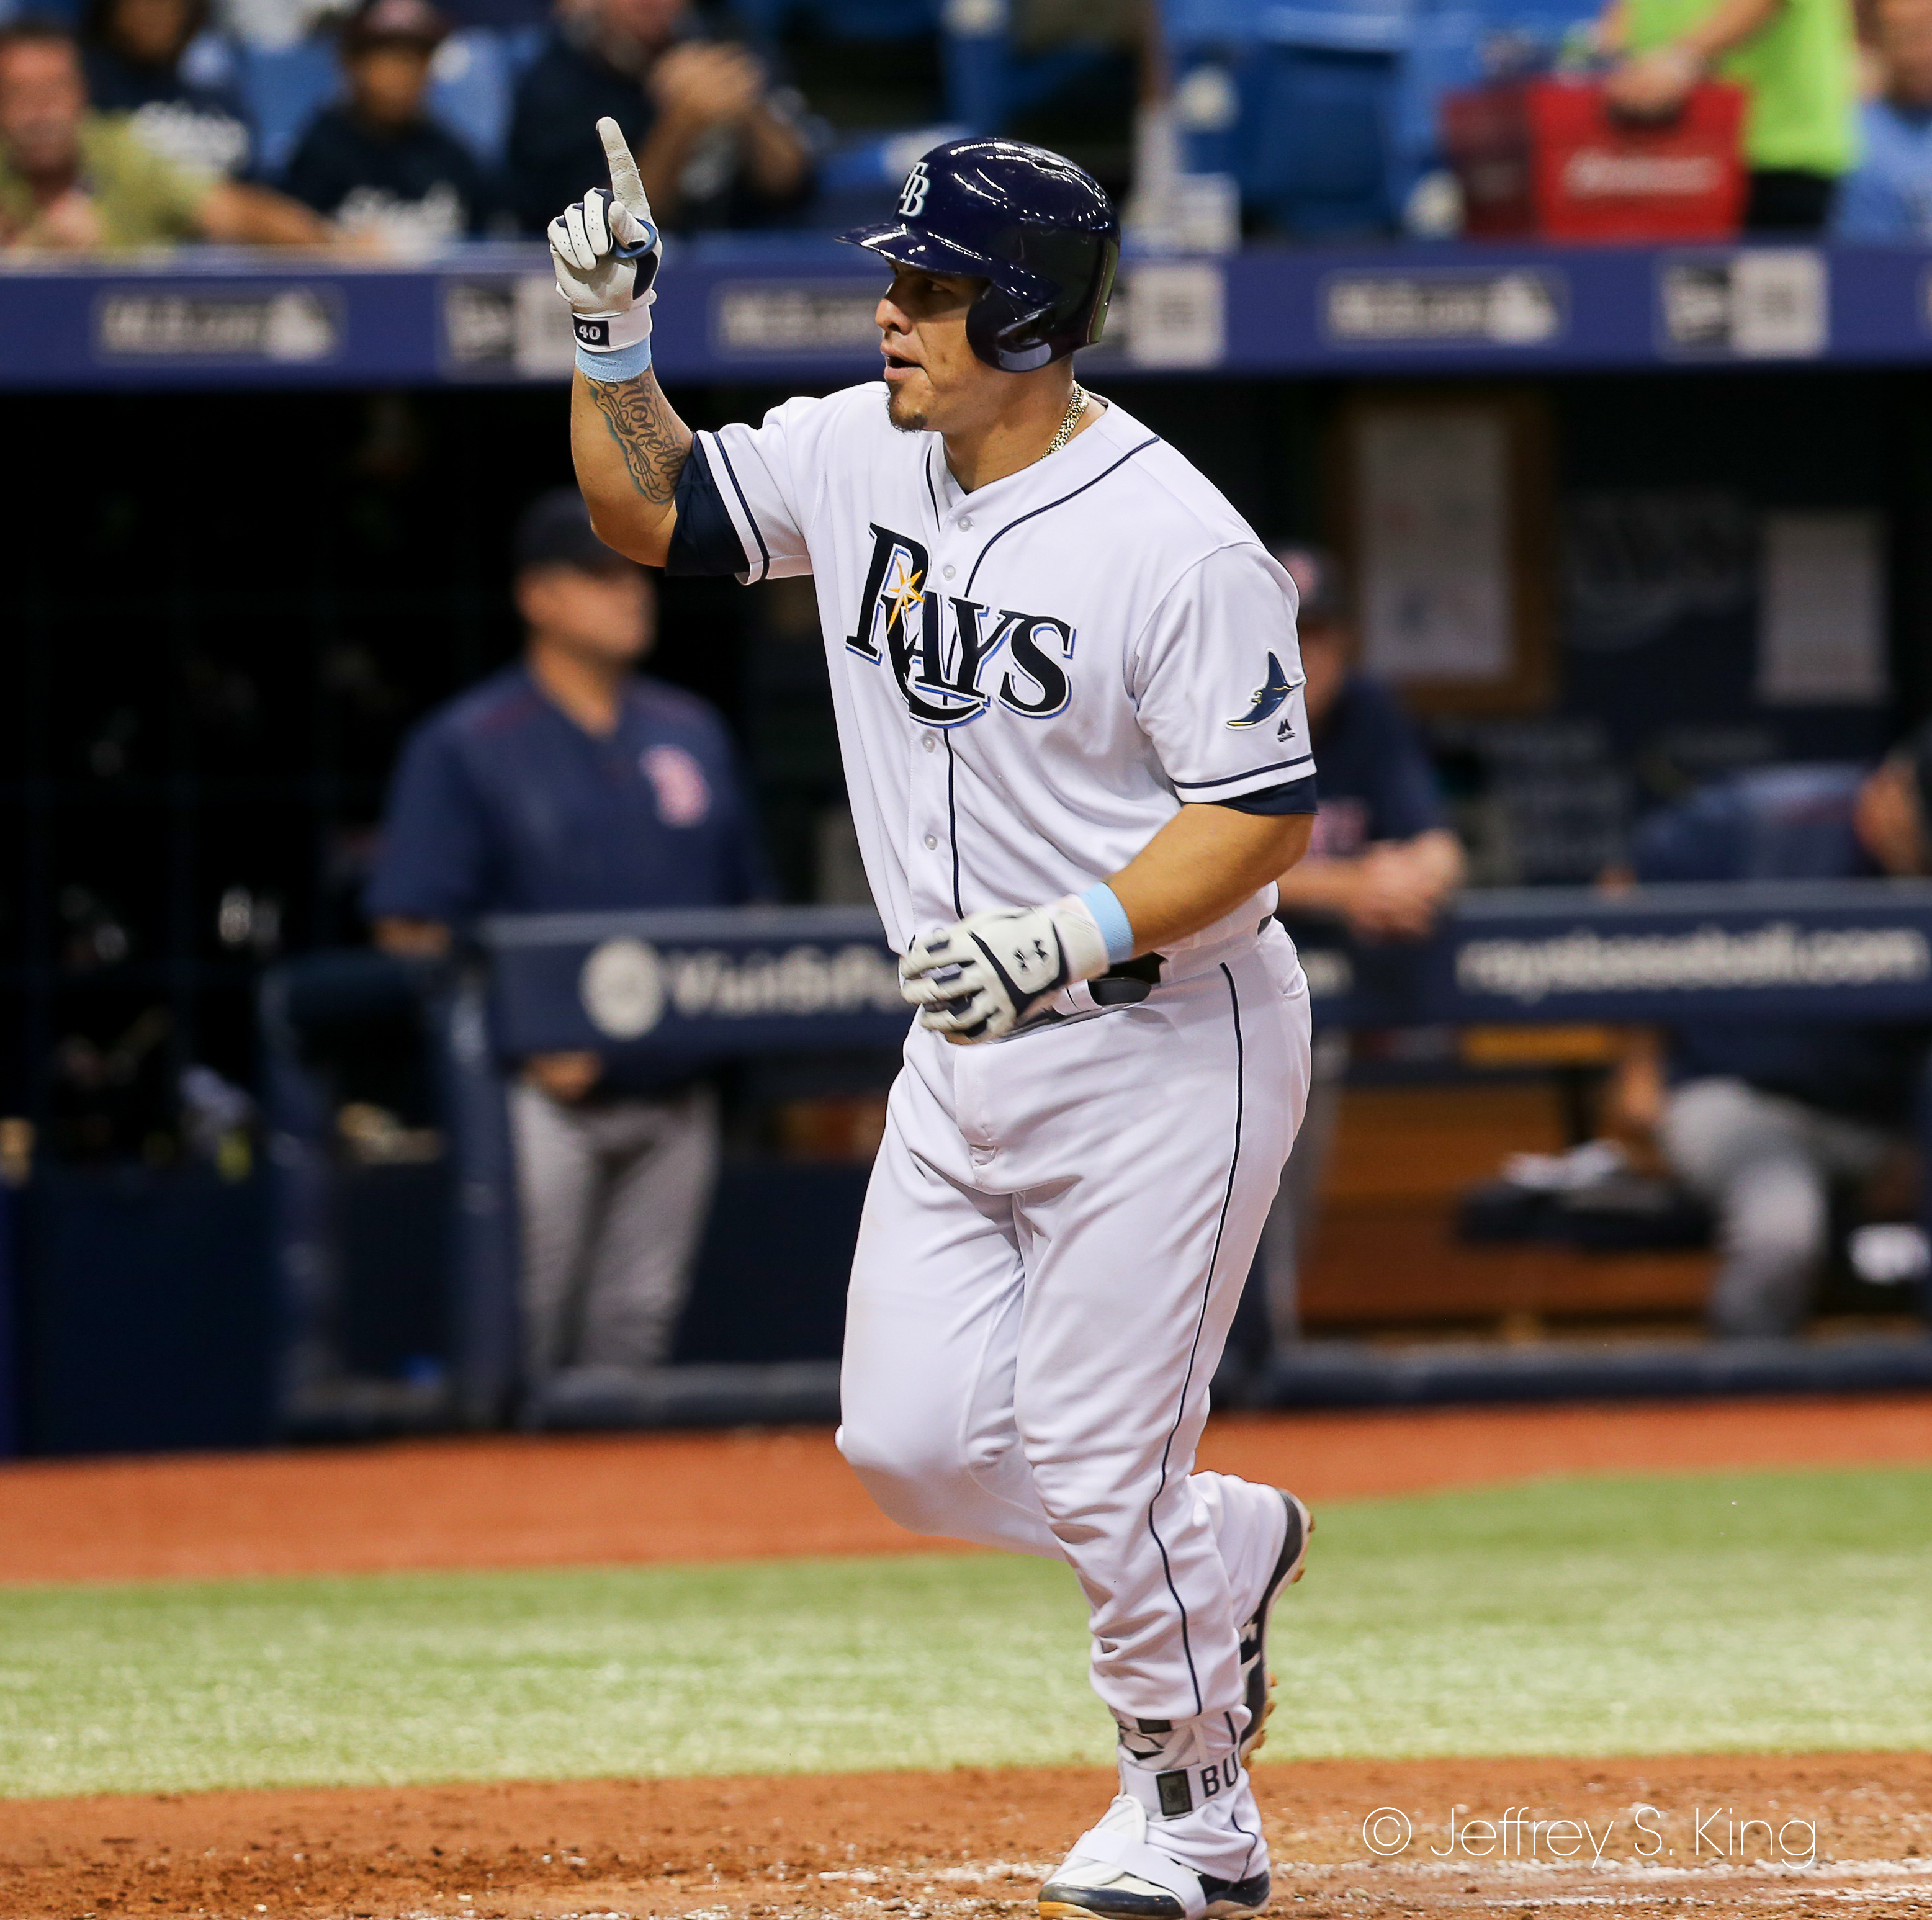 Ramos hit a homer for the Rays./JEFFREY S. KING